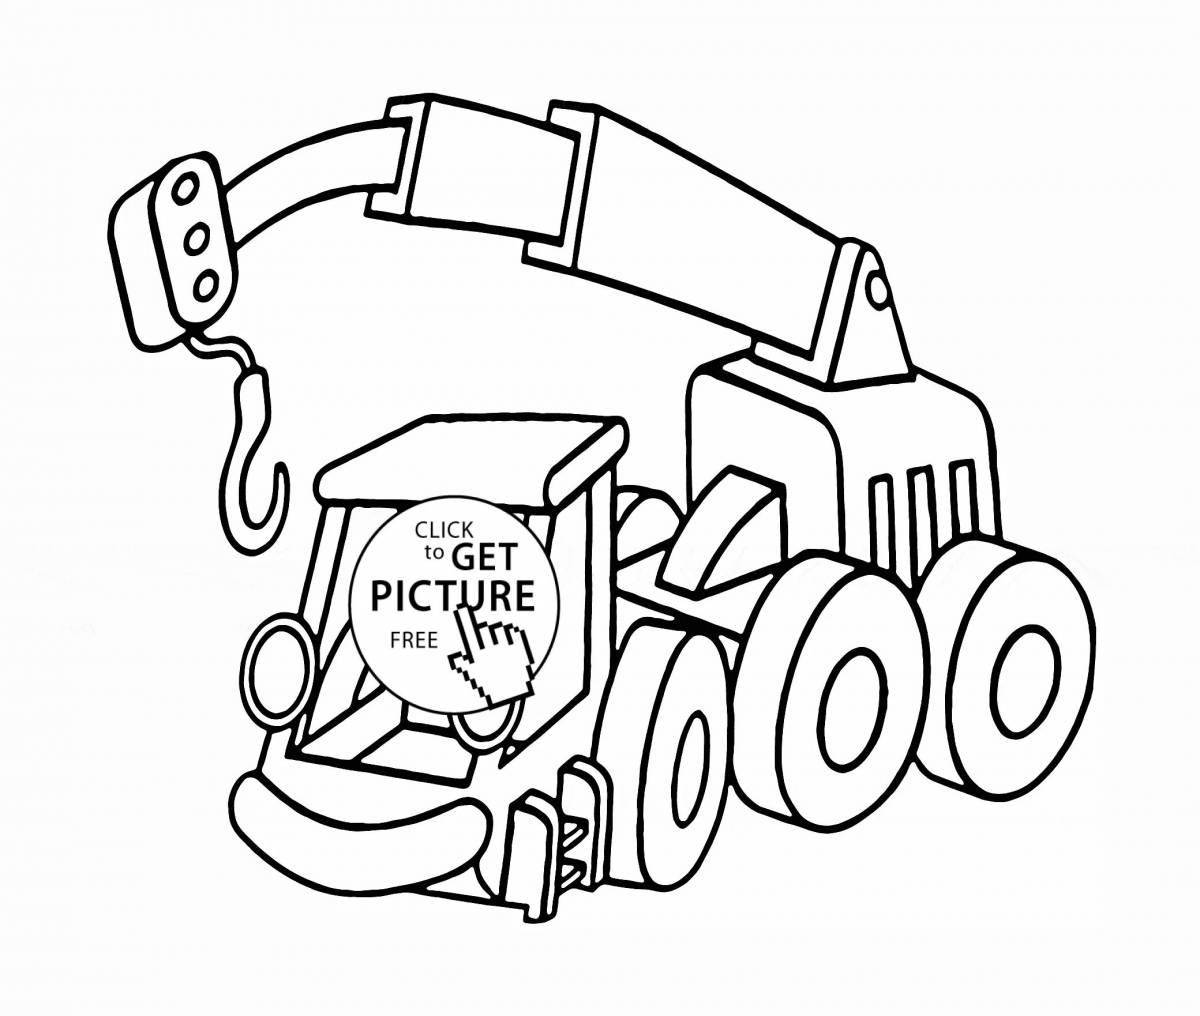 Outstanding Garbage Truck Coloring Page for 3-4 year olds